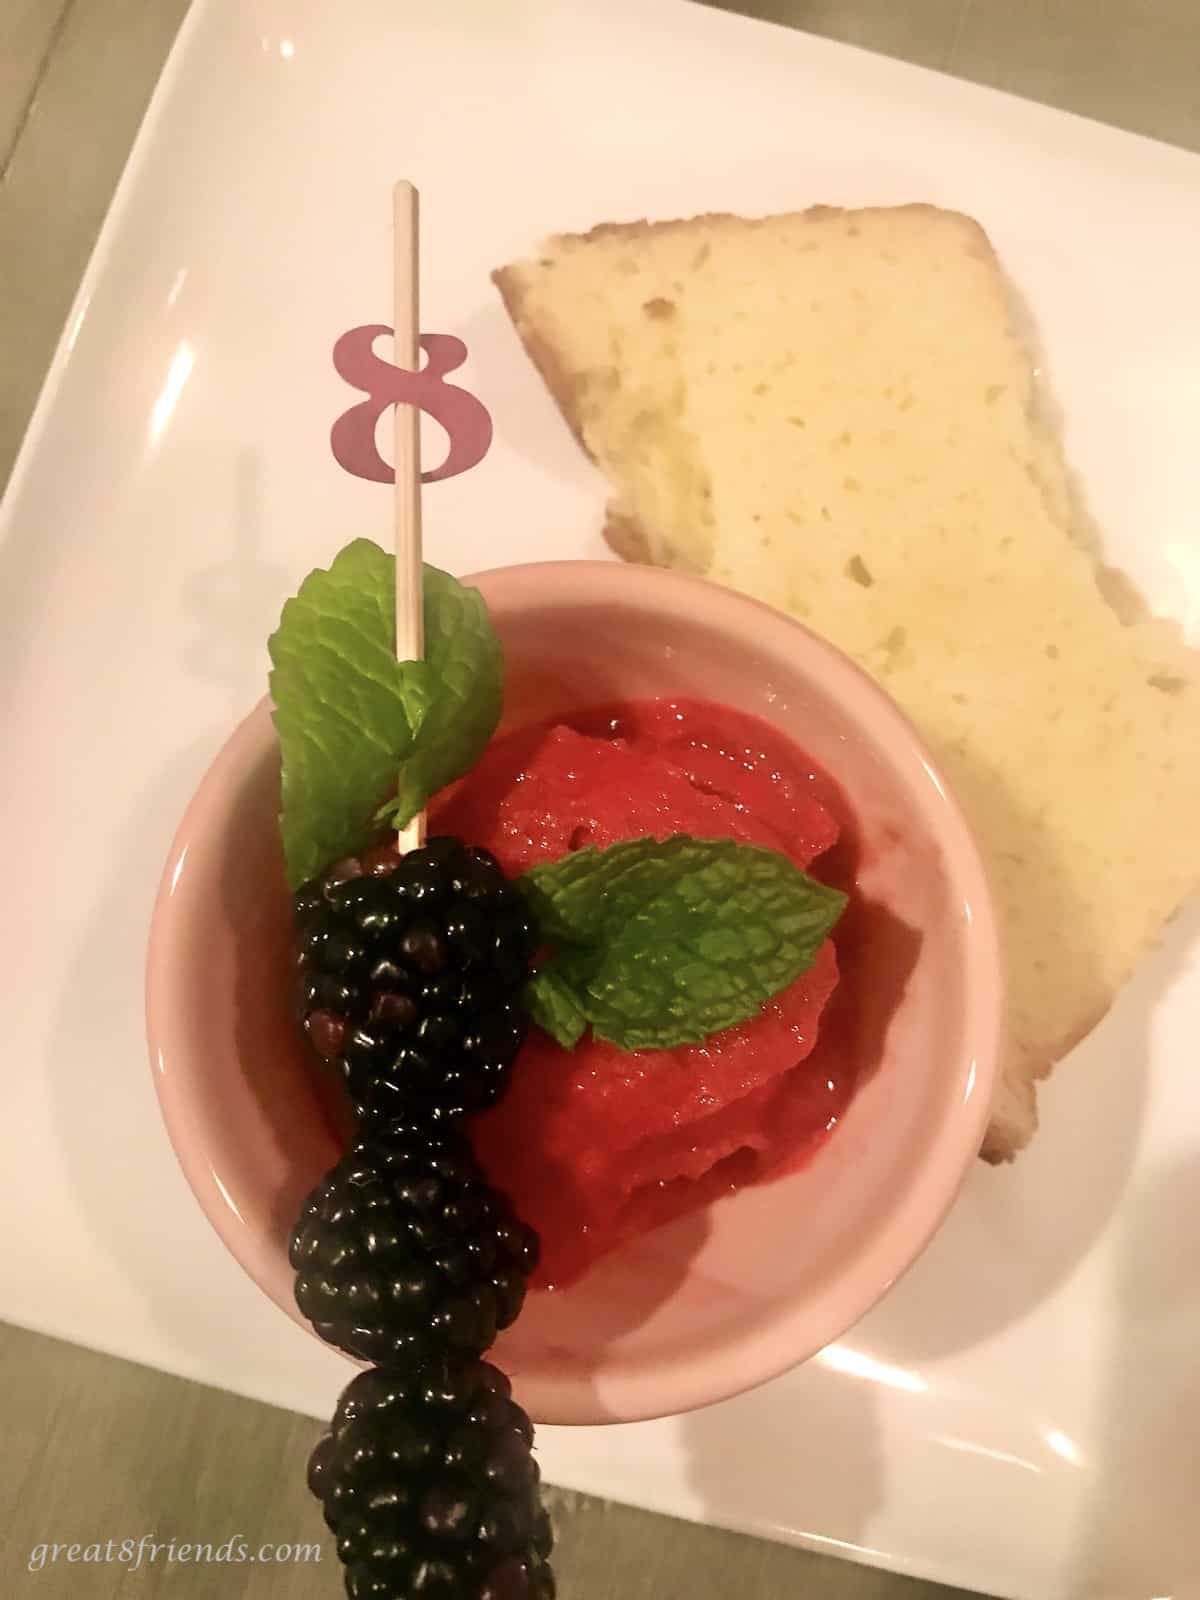 White plate with a slice of pound cake and a small bowl of blackberry ice with fresh blackberries on a stick on the edge of the bowl.